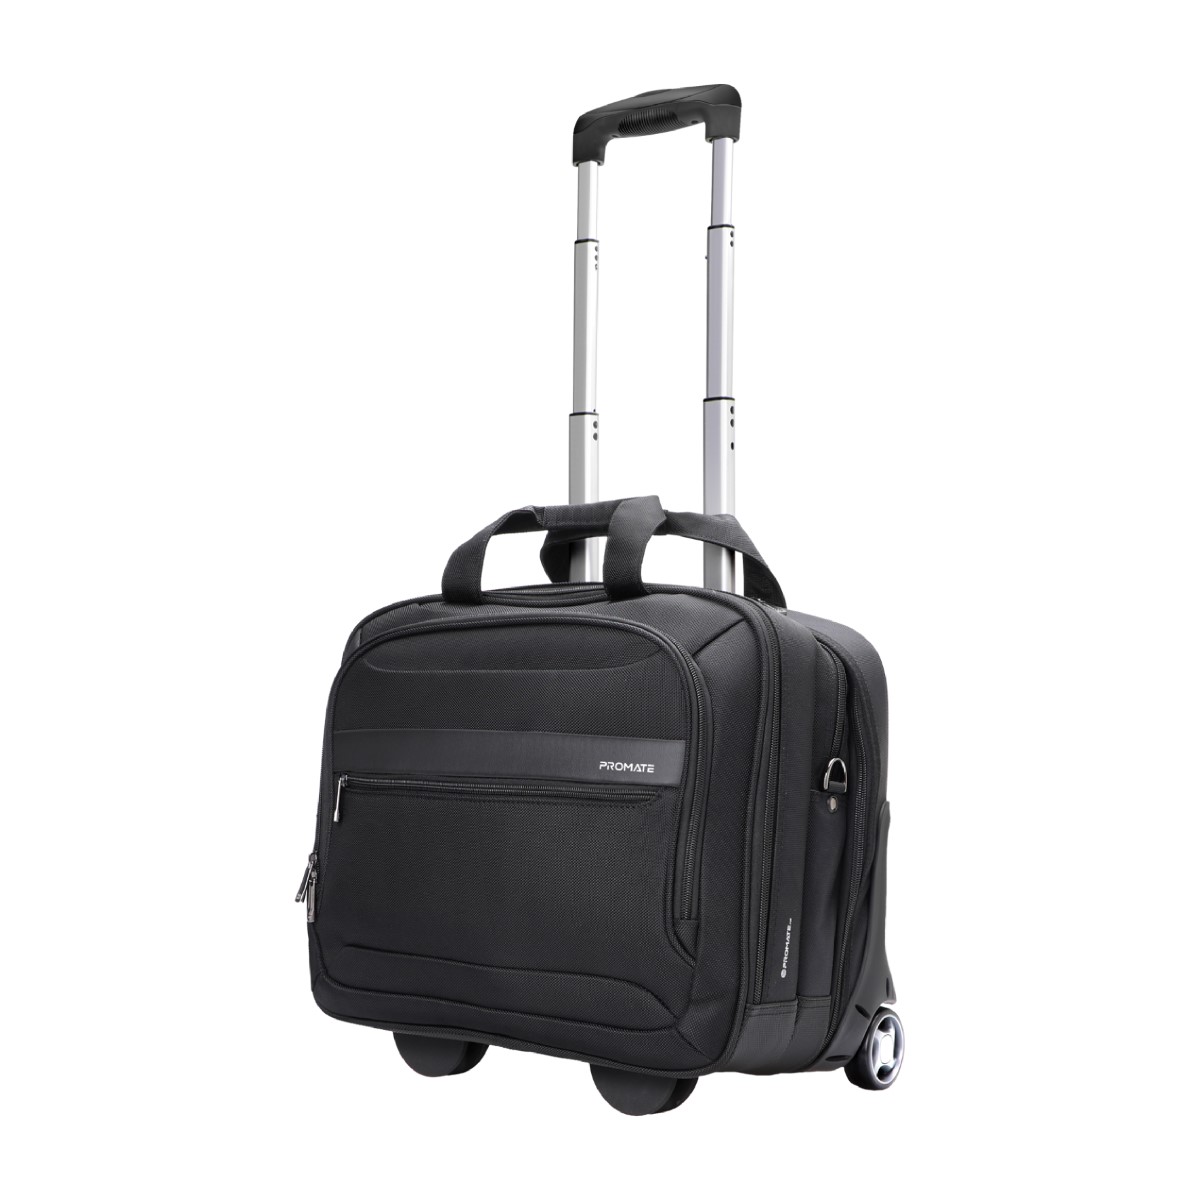 Promate Trolley Bag, Versatile 2-in-1 Lightweight Trolley Laptop Bag with Shoulder Strap, Telescoping Handle, Water Resistance and In-Line Wheels for 16” Laptops, MacBooks, iPad, Dell XPS 13, Persona-TR